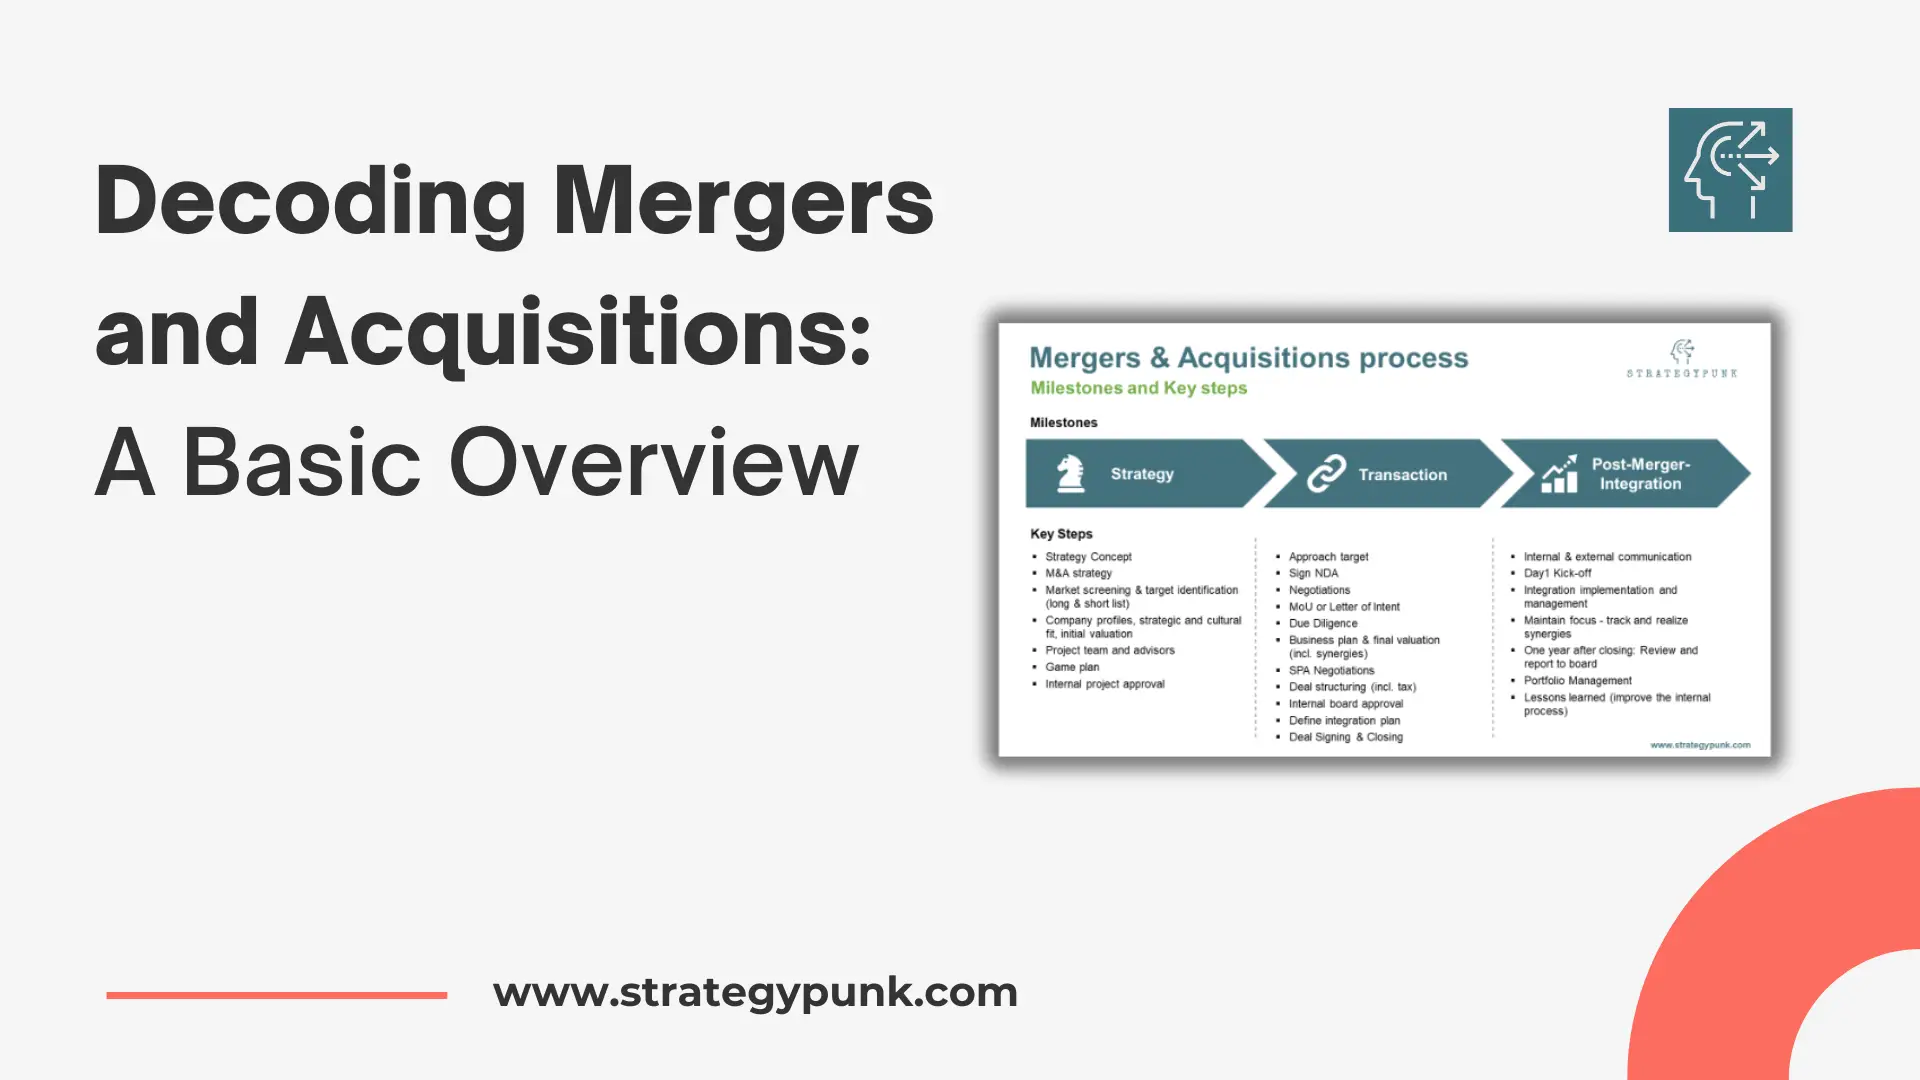 Decoding Mergers and Acquisitions: A Basic Overview